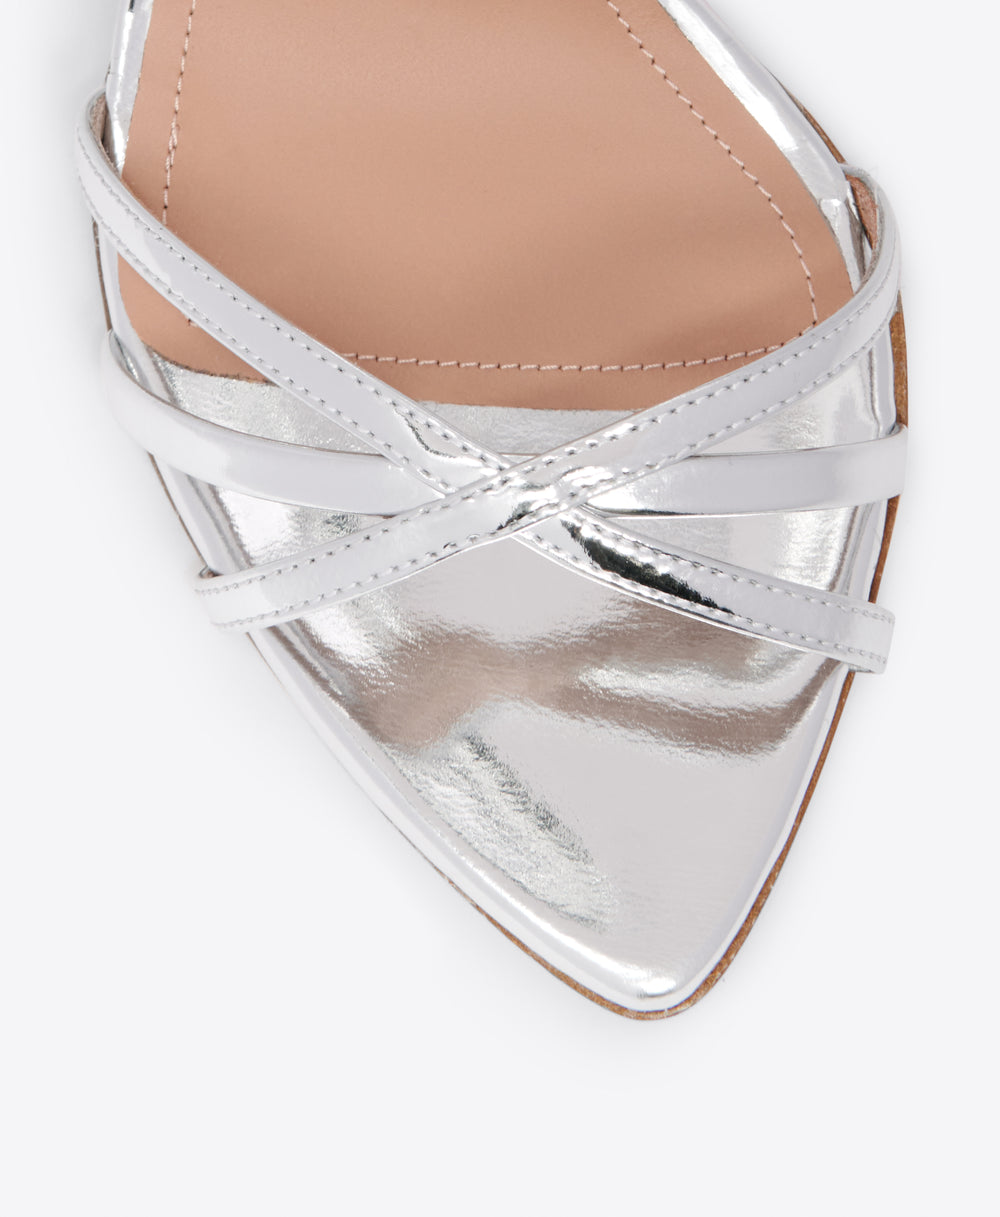 Yuna 90 Silver Mirror Leather Sandals Malone Souliers